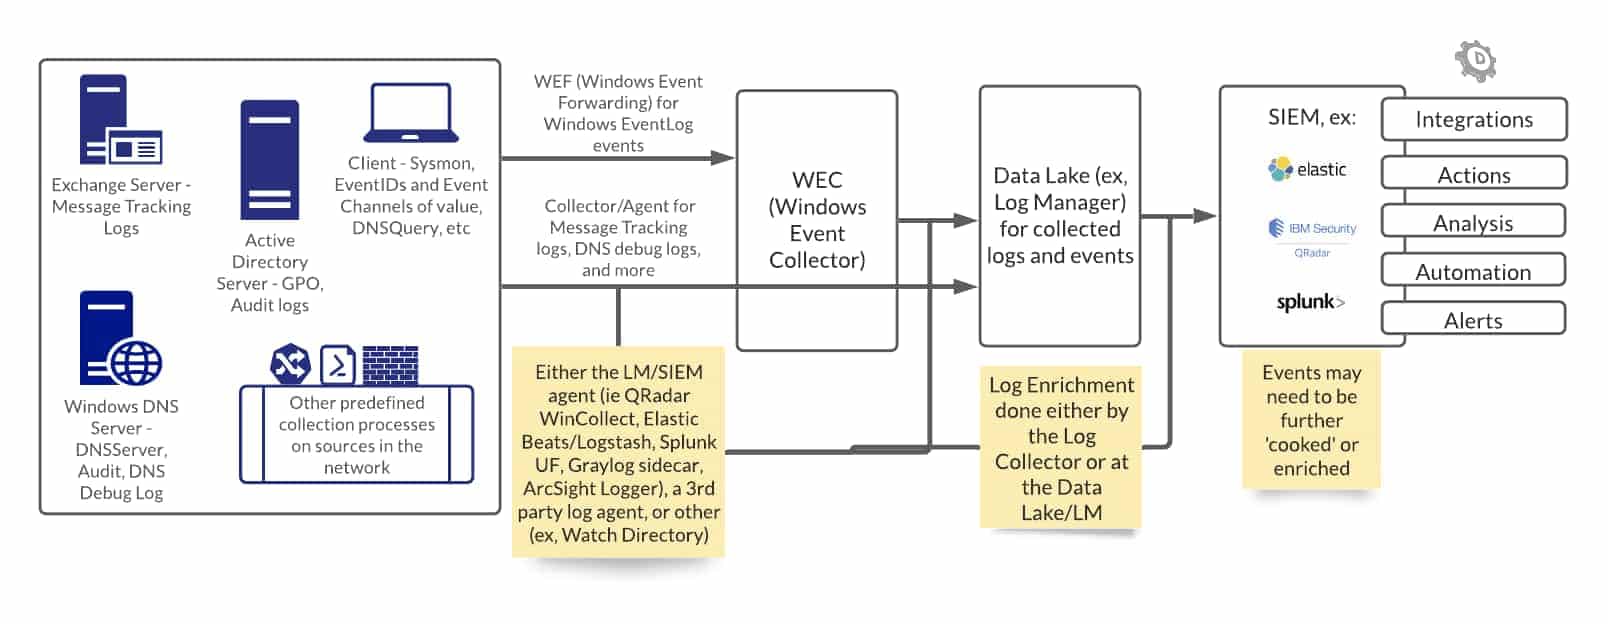 To put SOAR in context, the diagram below illustrates the workflow of logs from endpoints to further action.